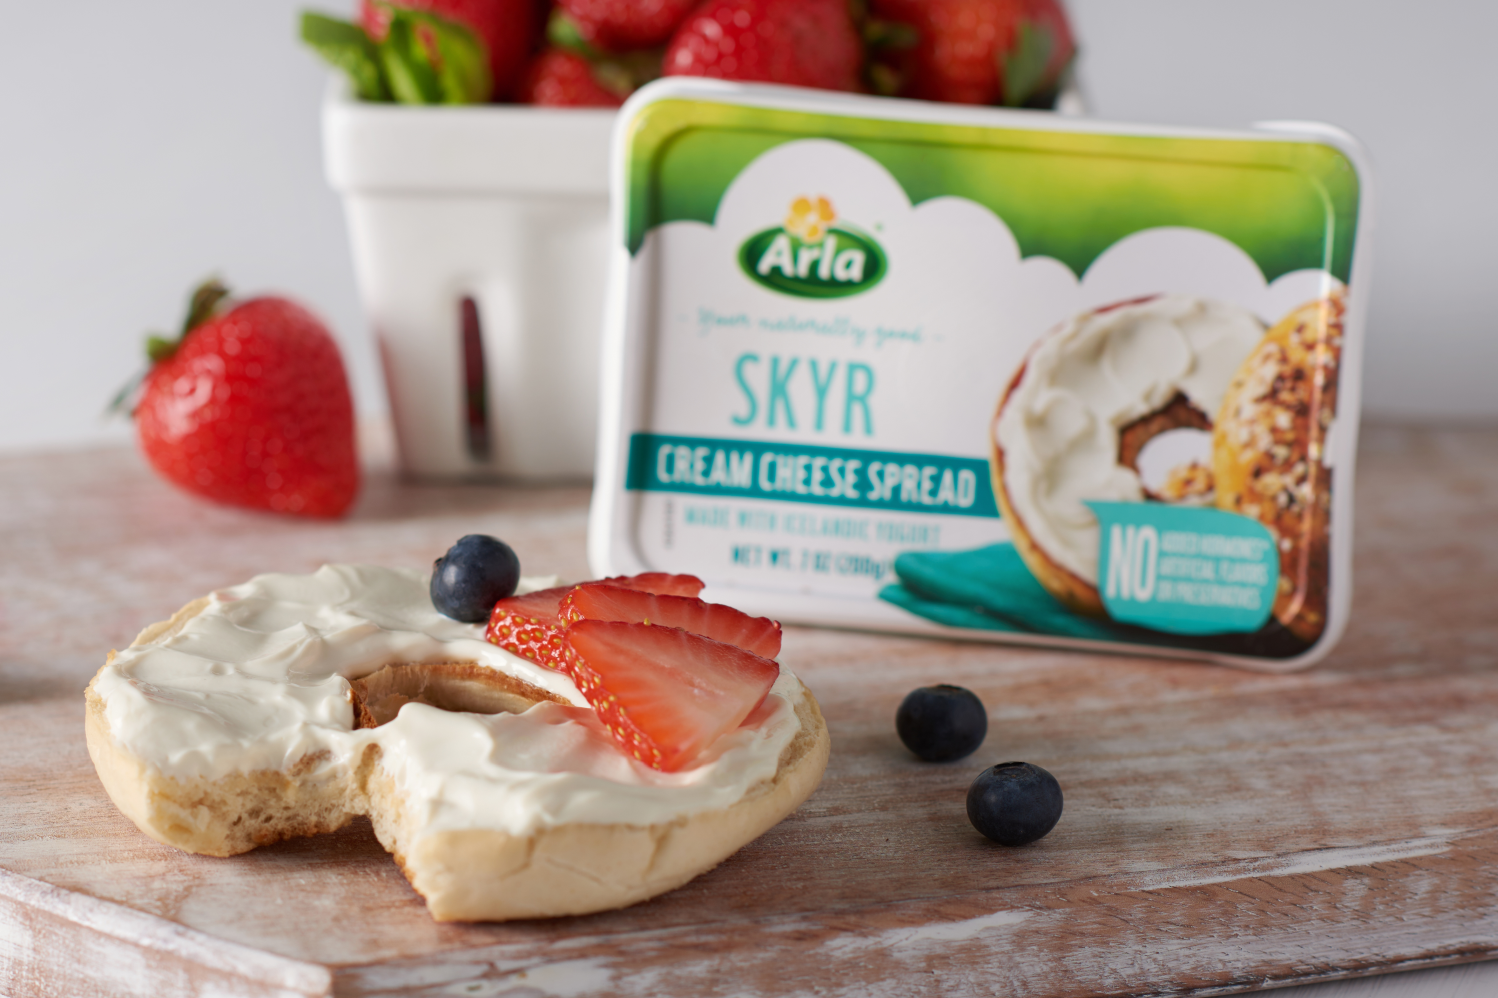 Arla introduces skyr cream cheese trying to get line: \'We\'re adoption on early in that